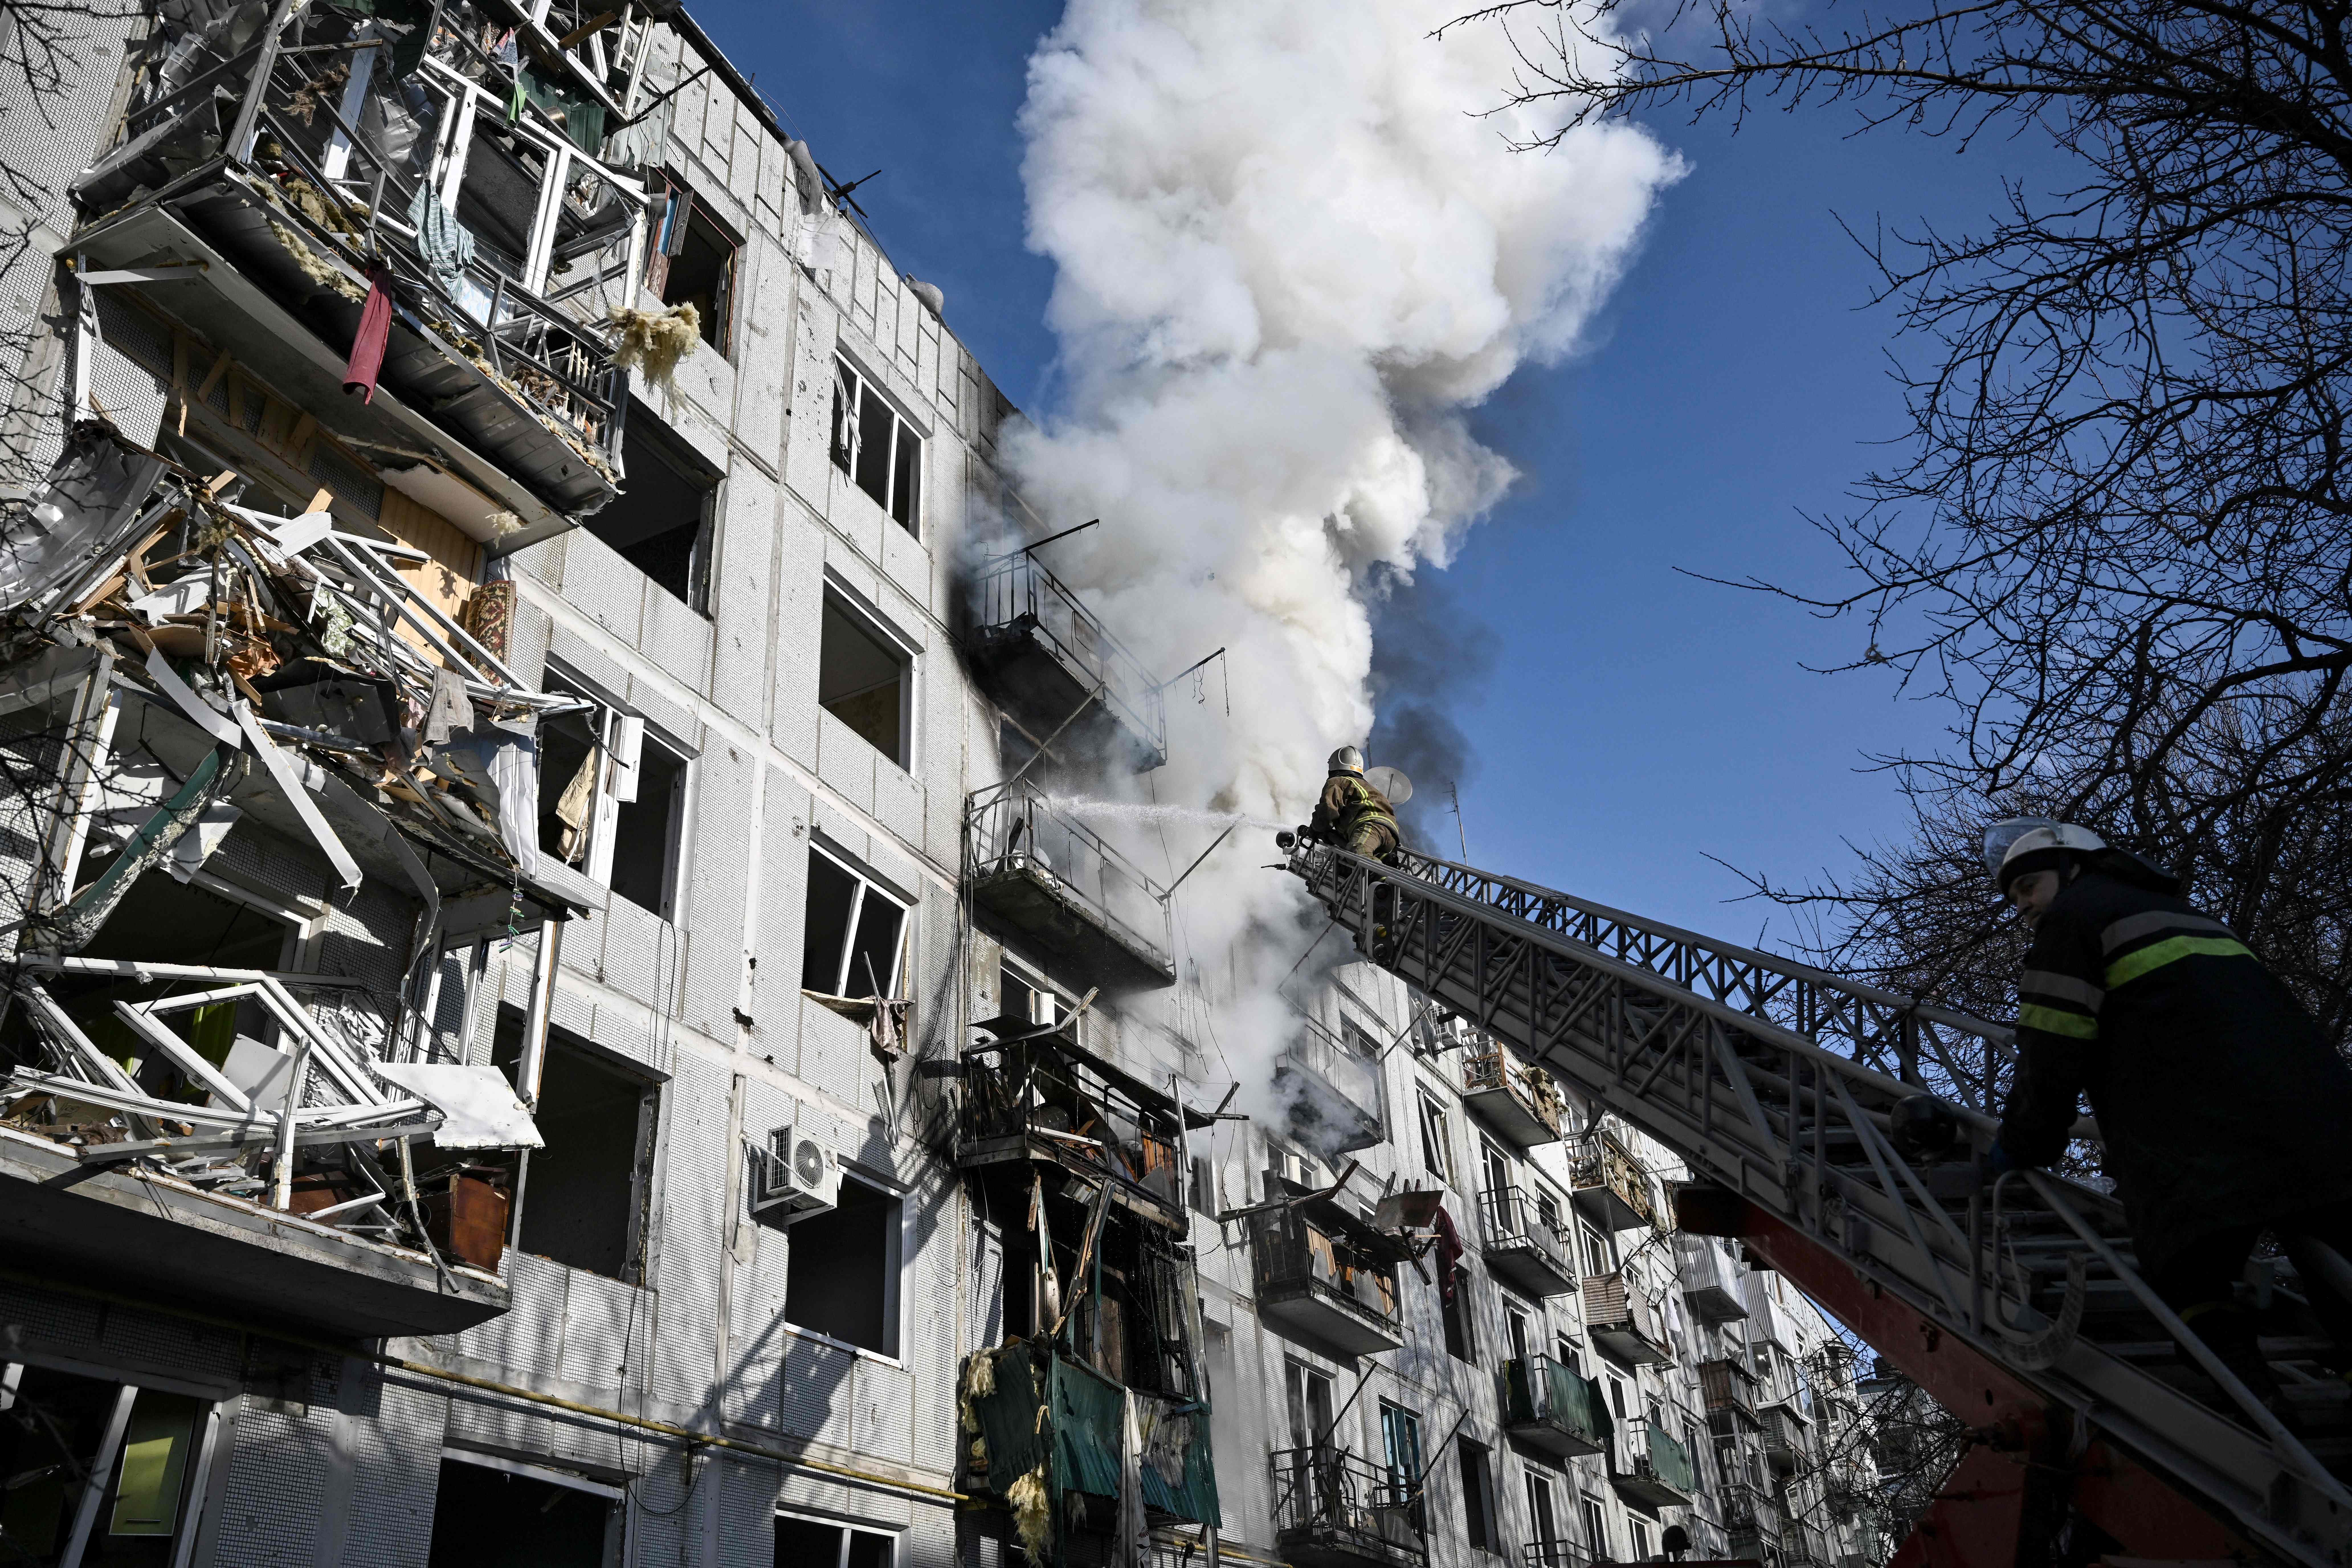 Firefighters attend to a building in Chuguiv, near Kharkiv, on Thursday